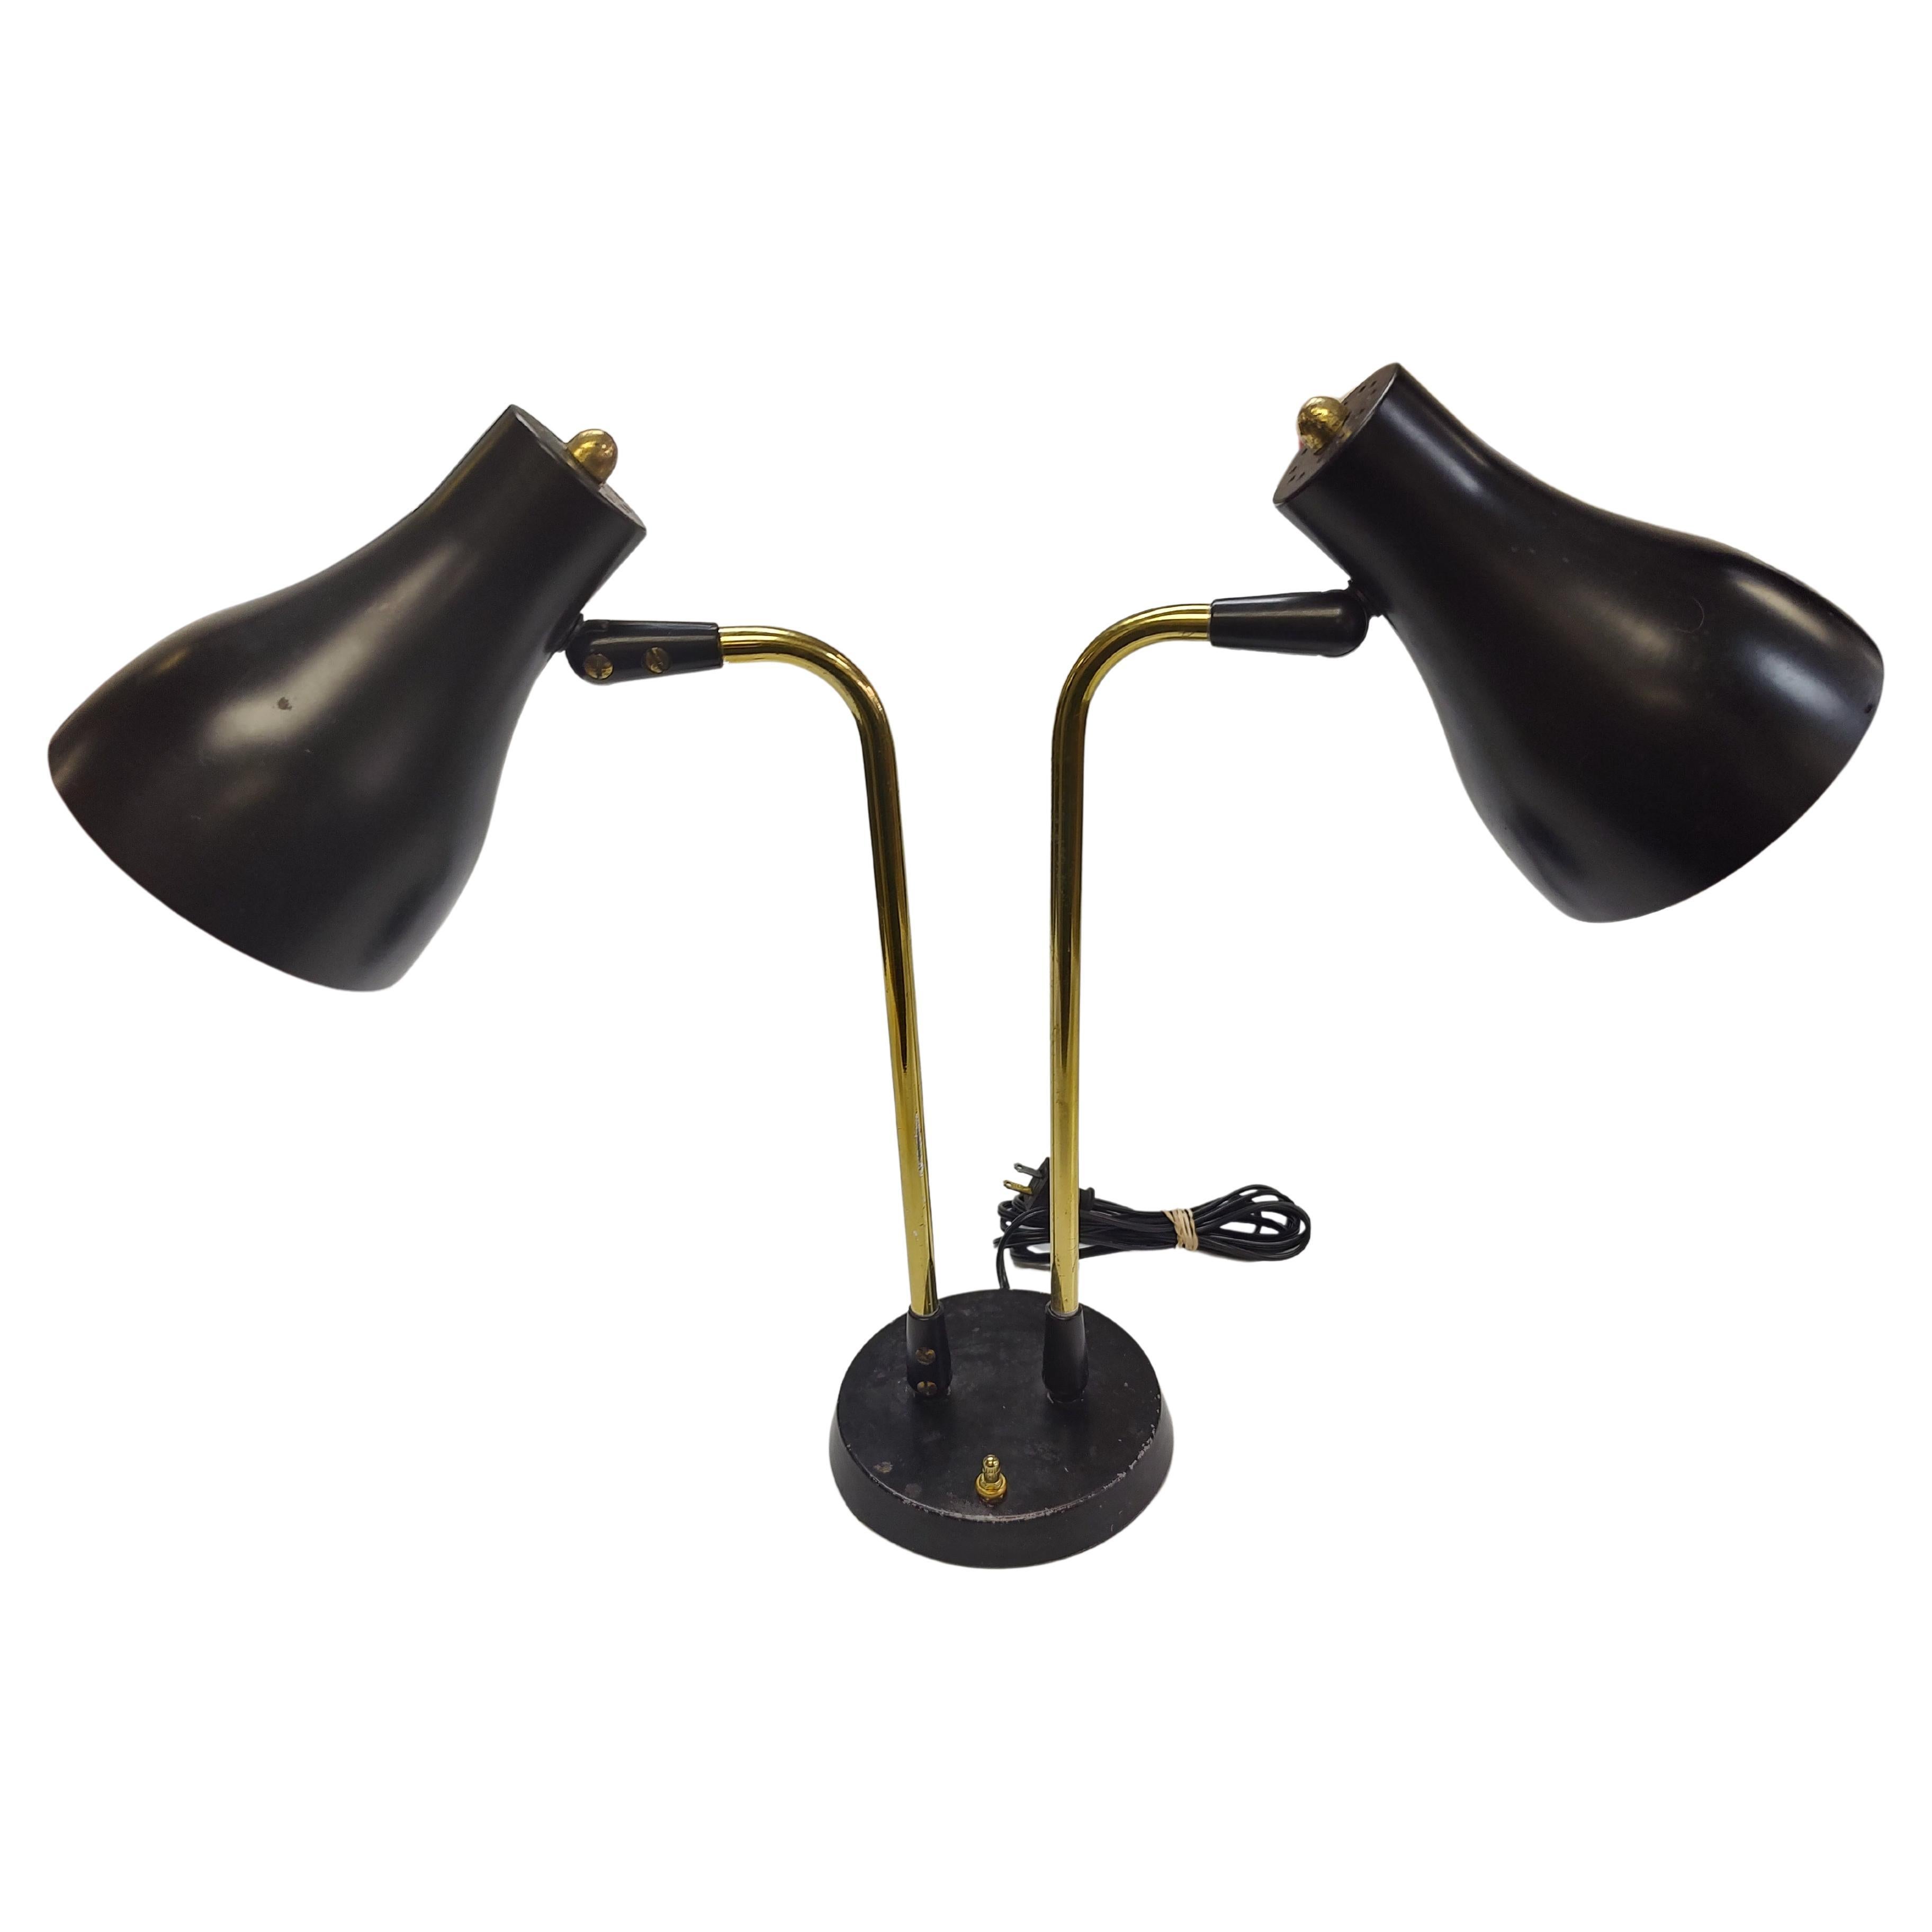 Fabulous Mid-Century Modern double headed desk lamp. Great style, brass stems with a painted base and shades. New wiring and 3way switch. In excellent vintage condition with minimal wear.